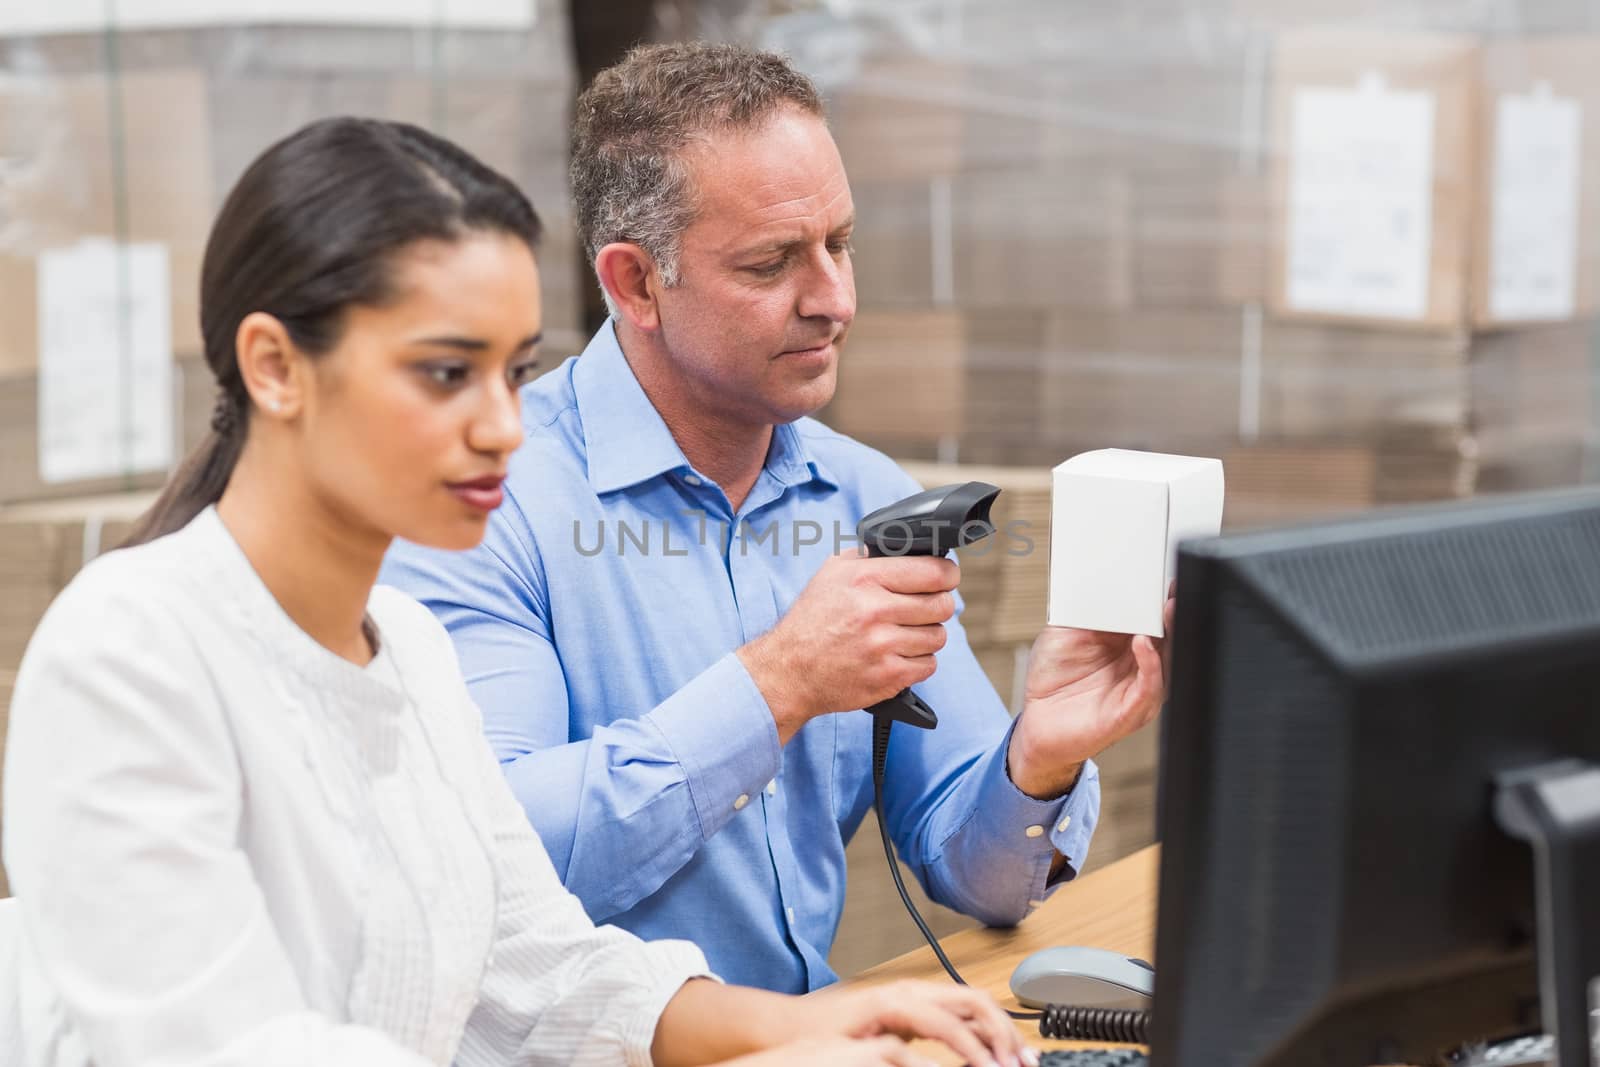 Manager scanning box while his colleague typing on laptop by Wavebreakmedia